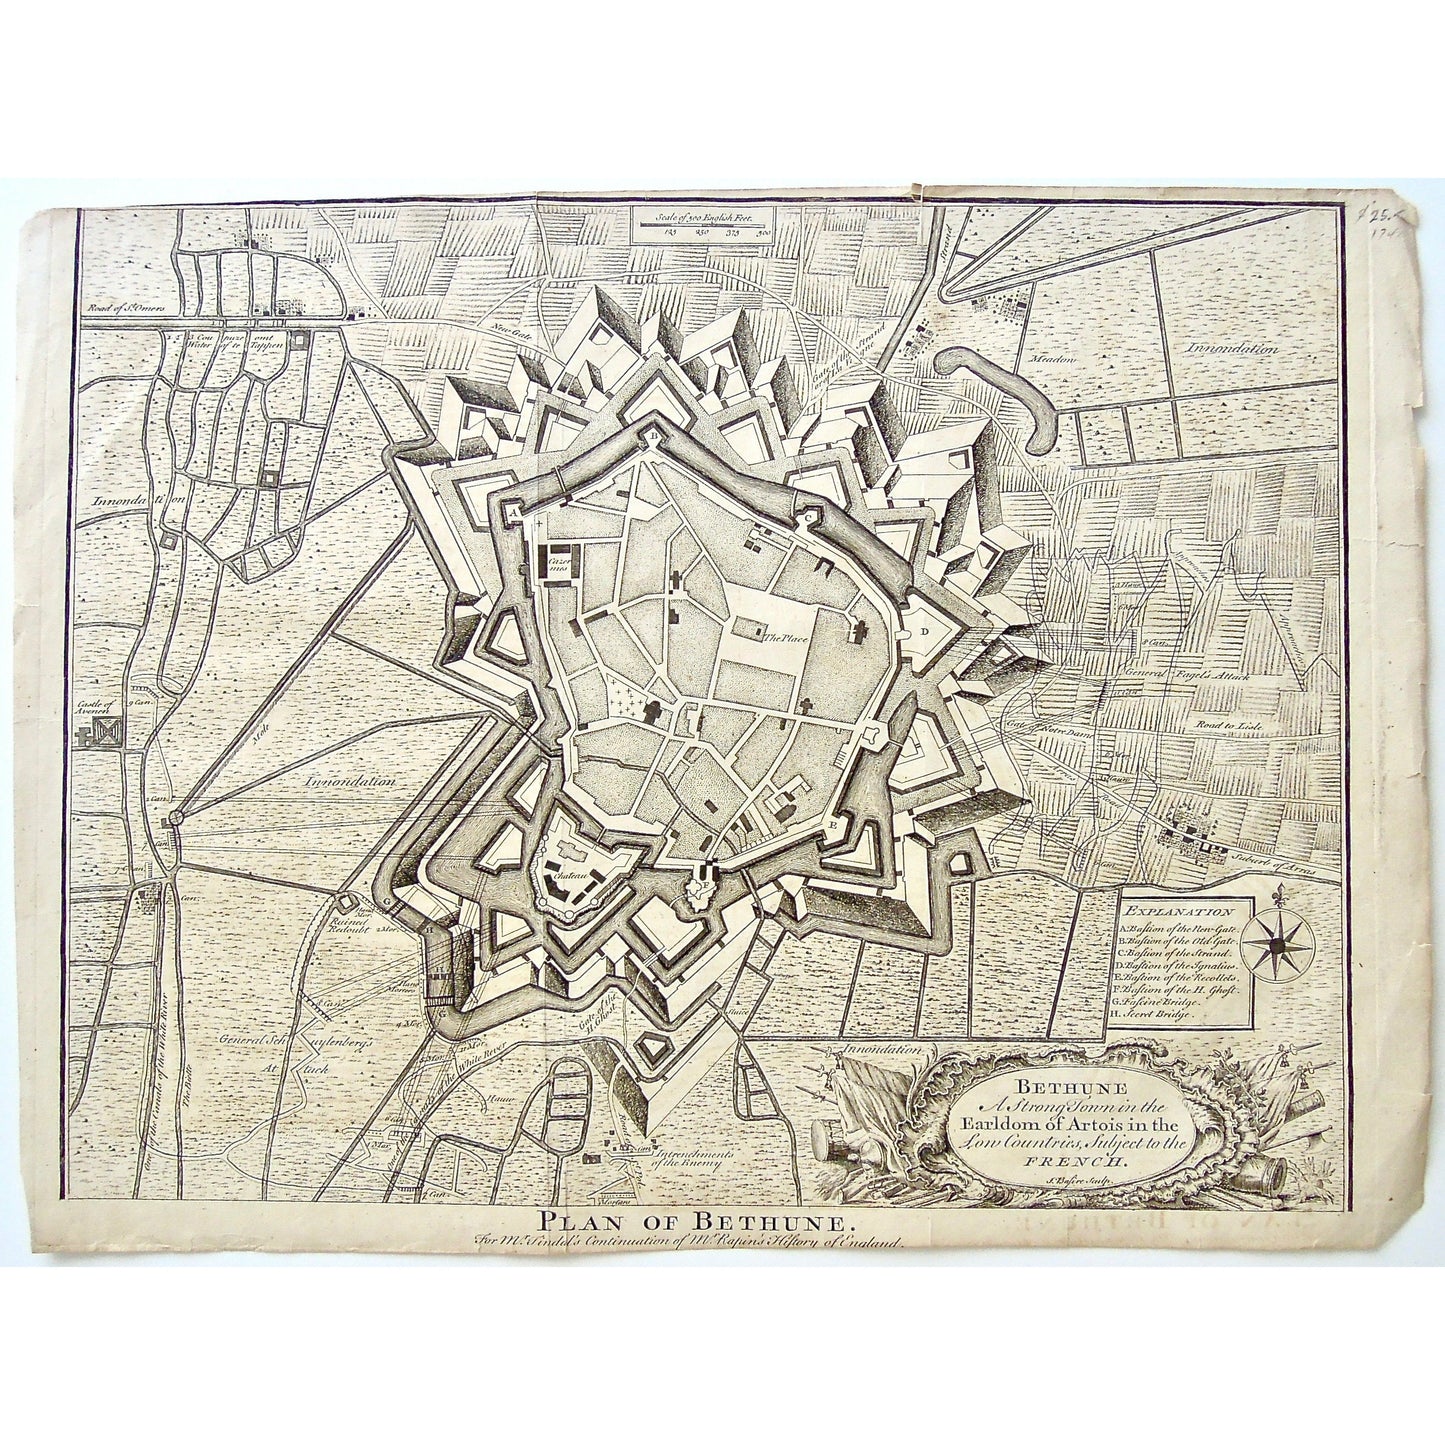 Plan of Bethune, Plan, City Plan, Bethune, Tindal, Rapin's, History of England, Mr. Tindal's Continuation of Mr. Rapin's History of England, Map, Maps, Mapping, Town, Town Plan, Palace, Stand, Meadow, Innondation, La vigne, Gate of the Strand, New Gate, Road of St. Omers, Coupuzeomt, Water of the Tappen, Castle of Avenen, Castle, Avenen, White River, Cannals, Mote, Ruined Redoubt, Biett, Hand Morters, General Schuylenberg's Attack, General Schuylenberg, Hauw, Gate of the H. Ghost, Gate of the House Ghost, 